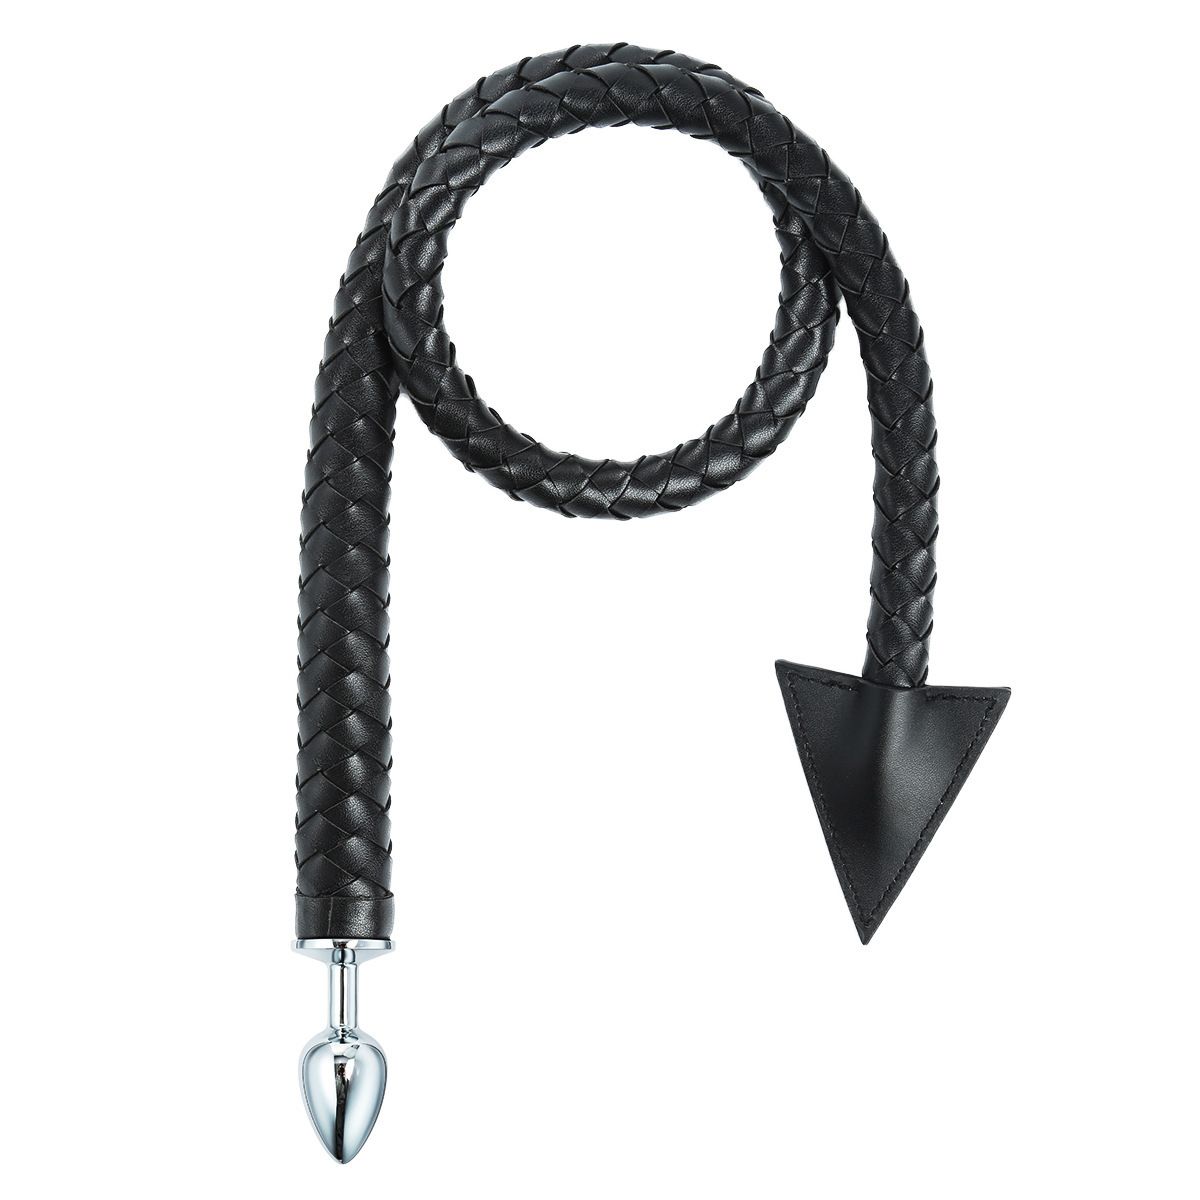 Massage Anal Bead Cute Sex Toys With Sexy Flirt Demon Cosplay Leather Whip Torture Tail For Men Women Gay Fetish Bdsm G Spot Massage From Sextoy_factorystore, $1.3 DHgate pic